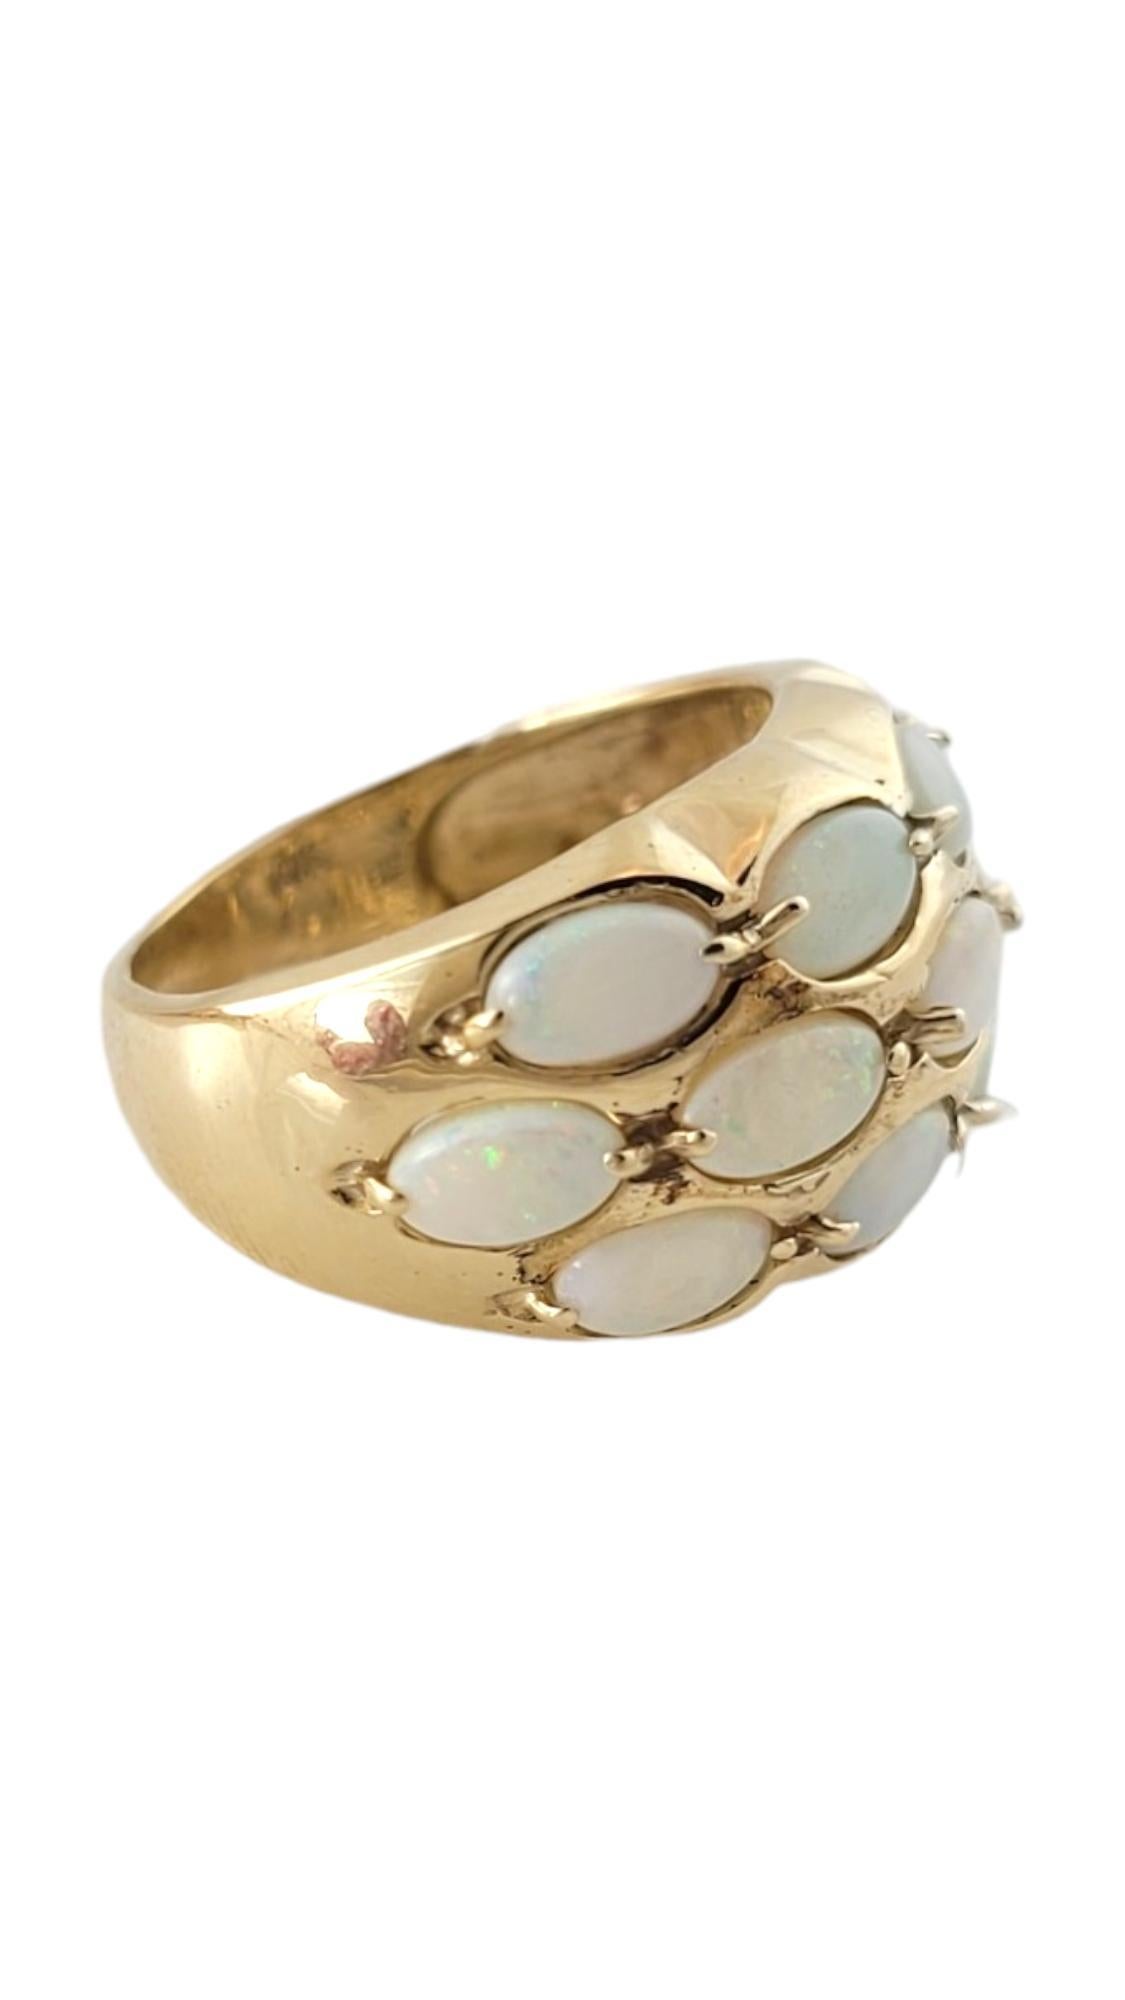 Vintage 10K Yellow Gold Opal Band Ring Size 4.5

This gorgeous 10K gold band ring features 13 sparkling opal stones for a breathtaking look!

Ring size: 4.5
Shank: 3.1mm
Front: 21.7mm X 11.9mm X 4.7mm

Weight: 2.7 dwt/ 4.1 g

Hallmark: 10K

Very